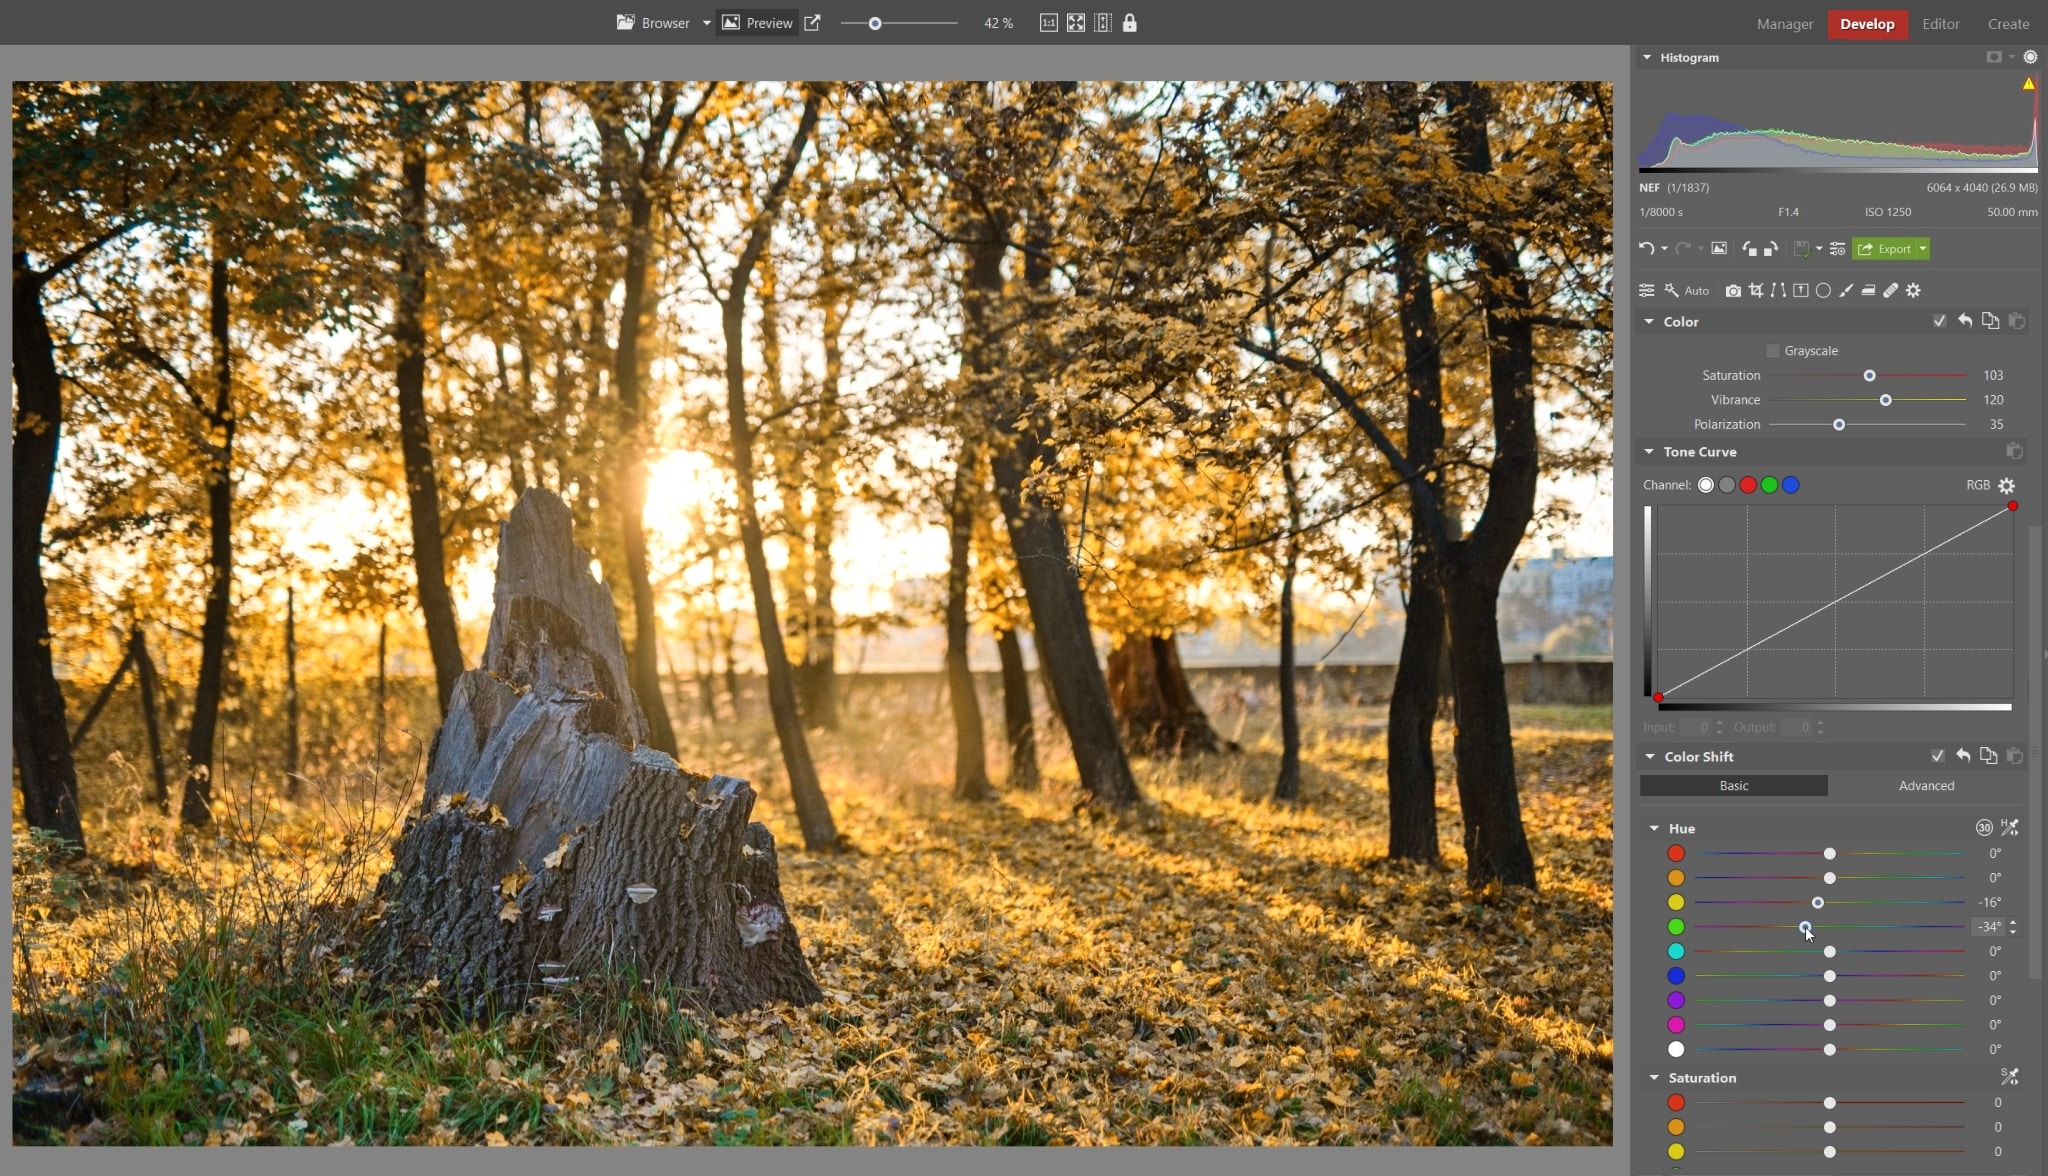 Processing RAW Images